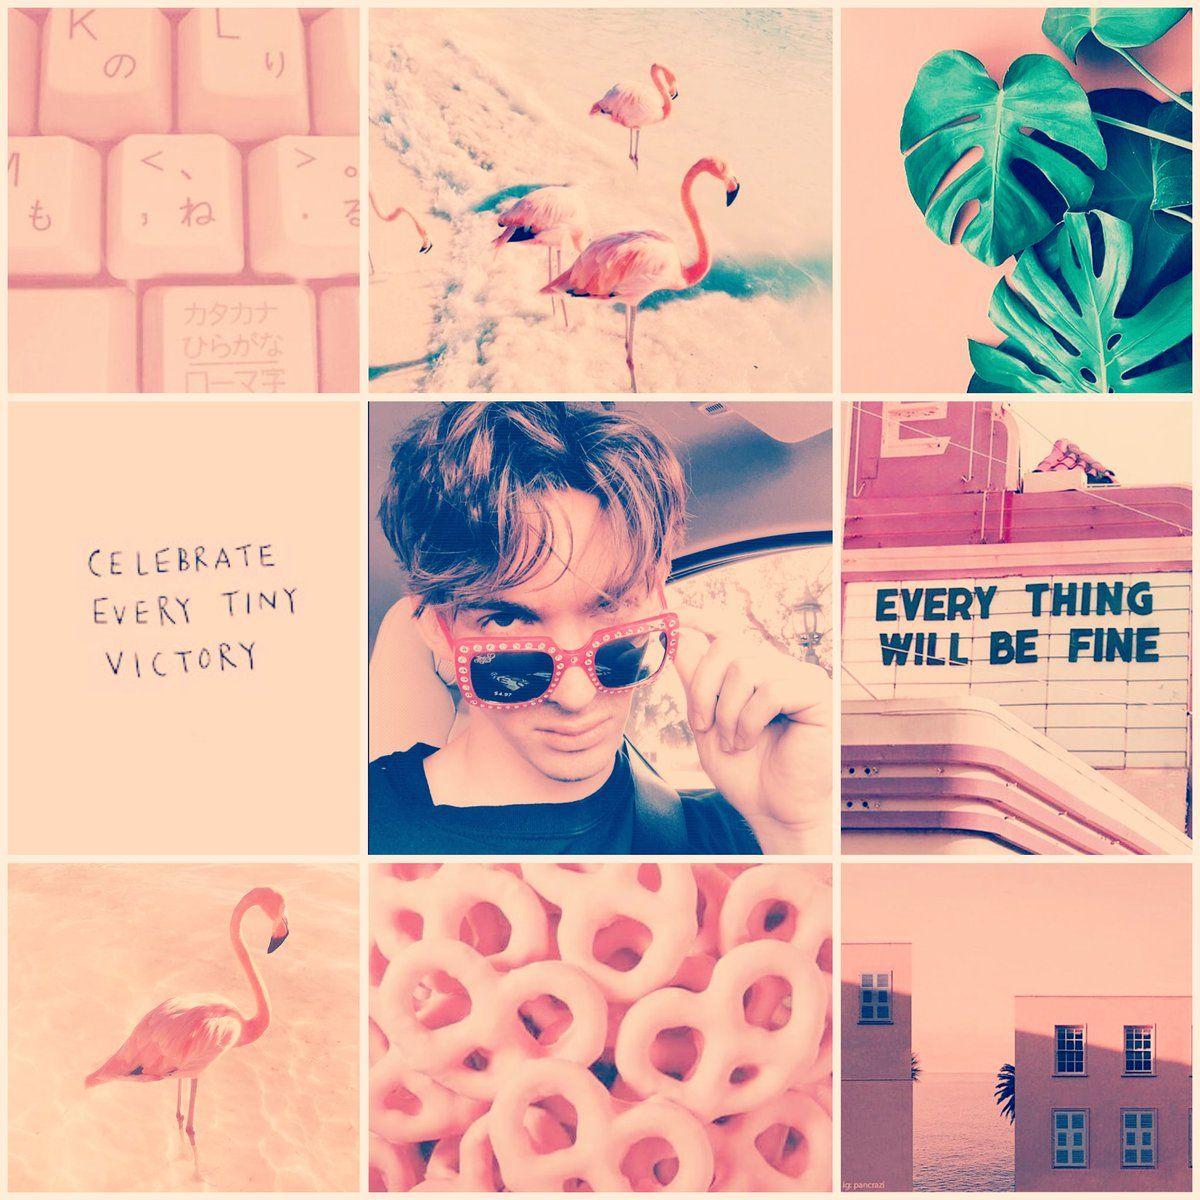 oh s'more alberto aesthetic :3 again our